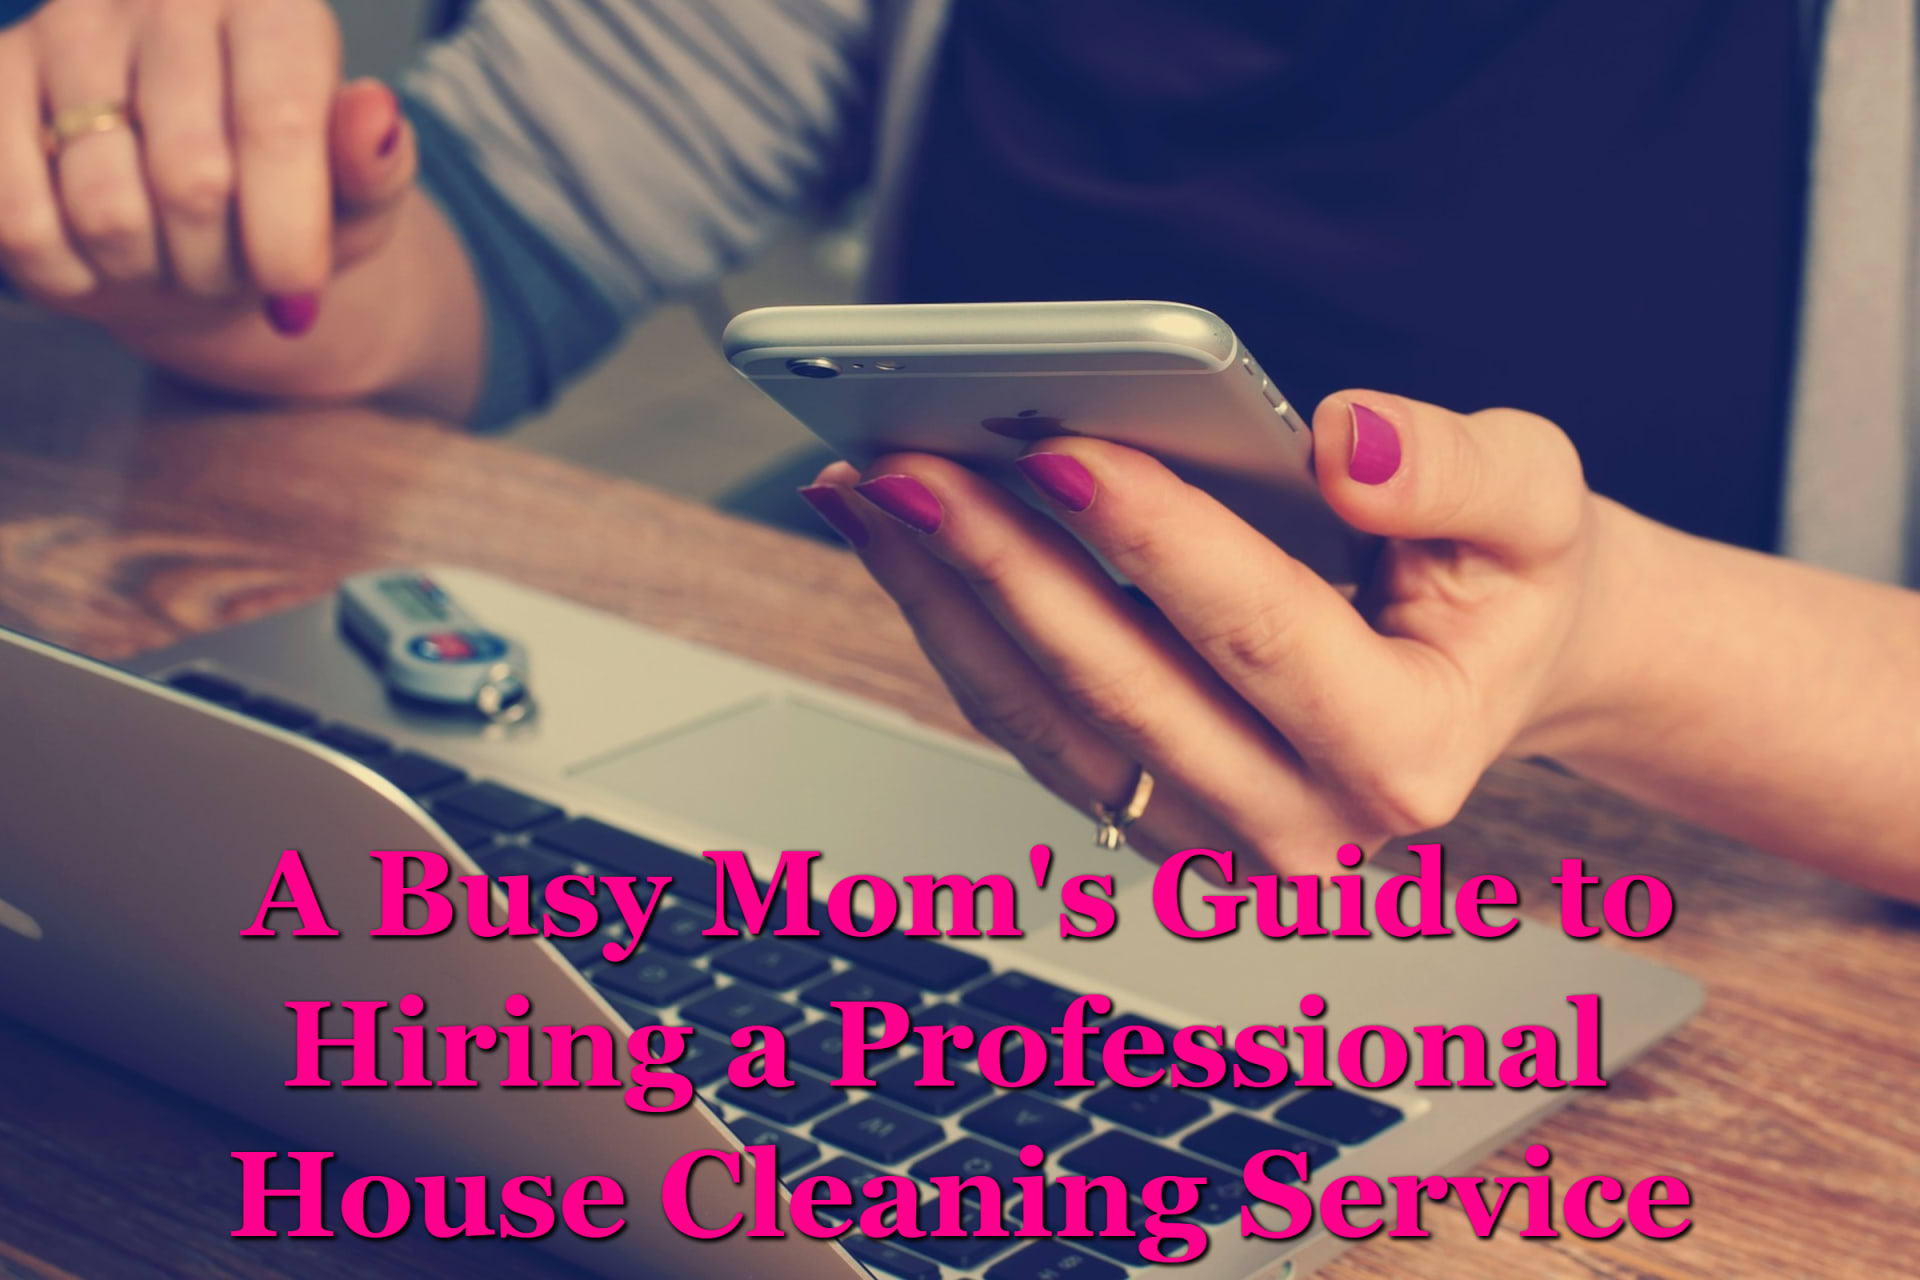 A busy mom looking into hiring a professional house cleaning service